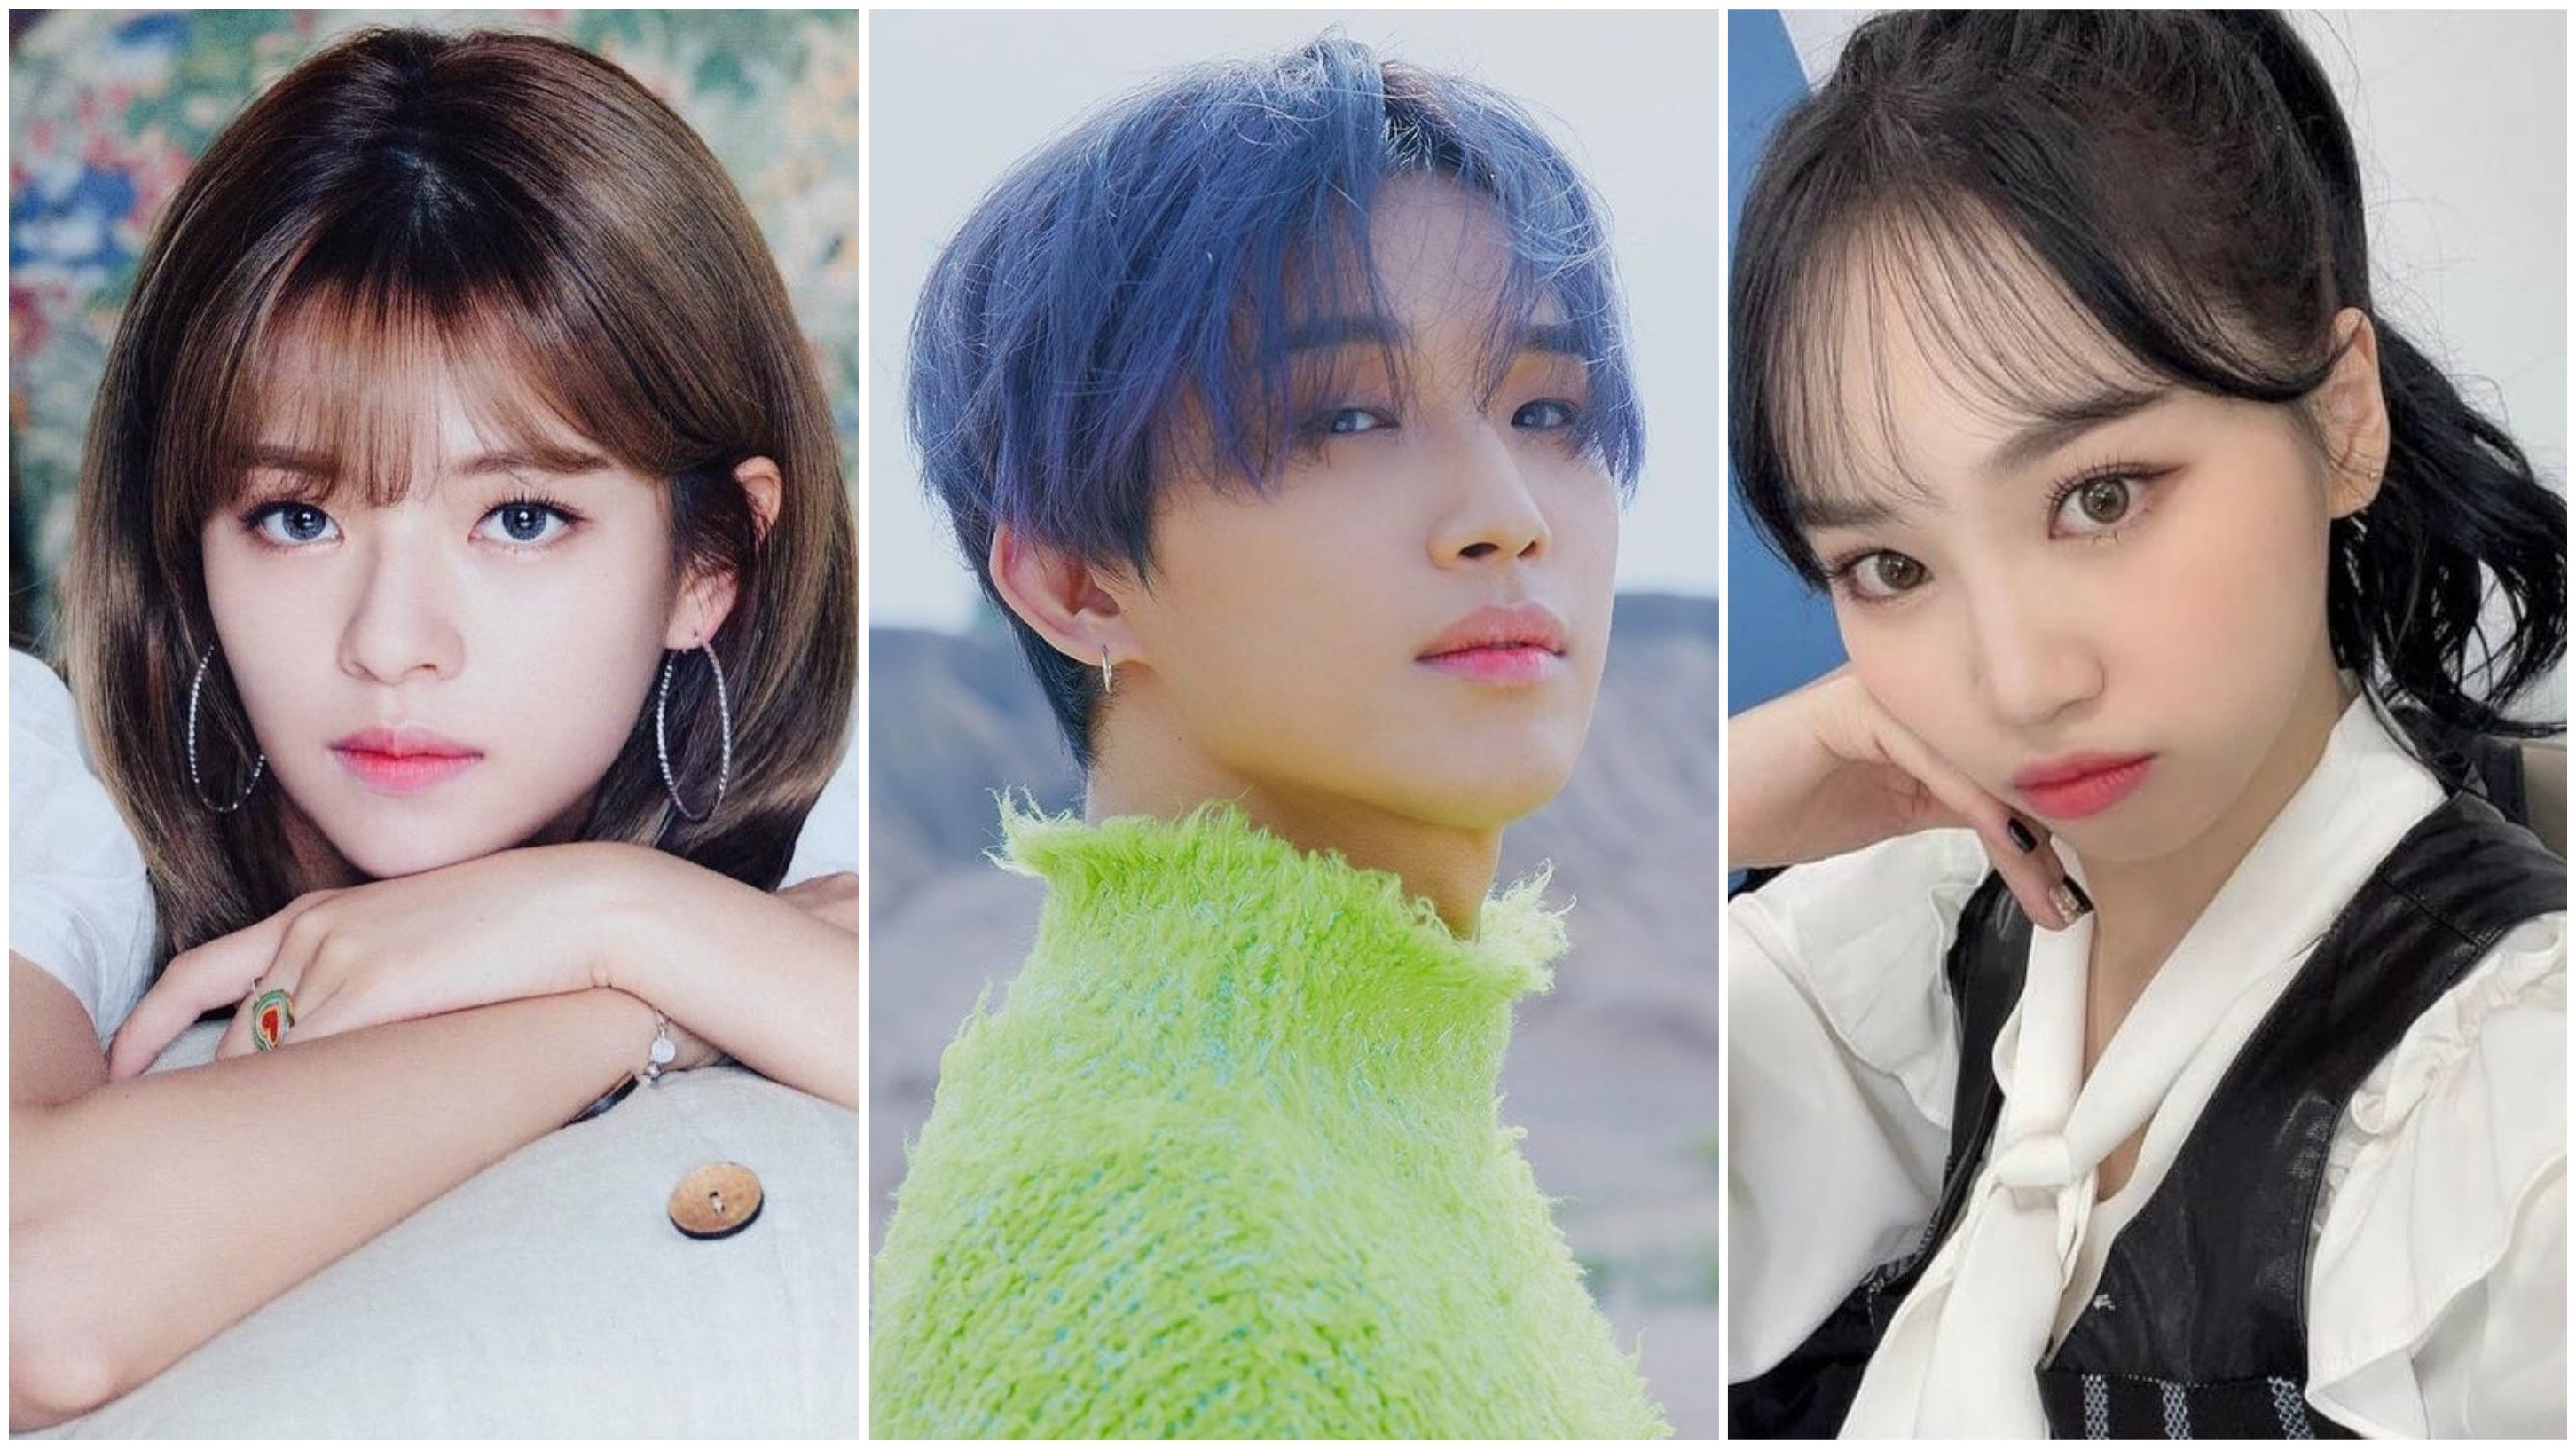 From left, Jeongyeon from Twice, Hyunsik from BtoB and Chaewon from Iz*One are just three K-pop icons with famous parents. Photo: @jungyeontwice, @imhyunsik, @chaewonizone/Instagram